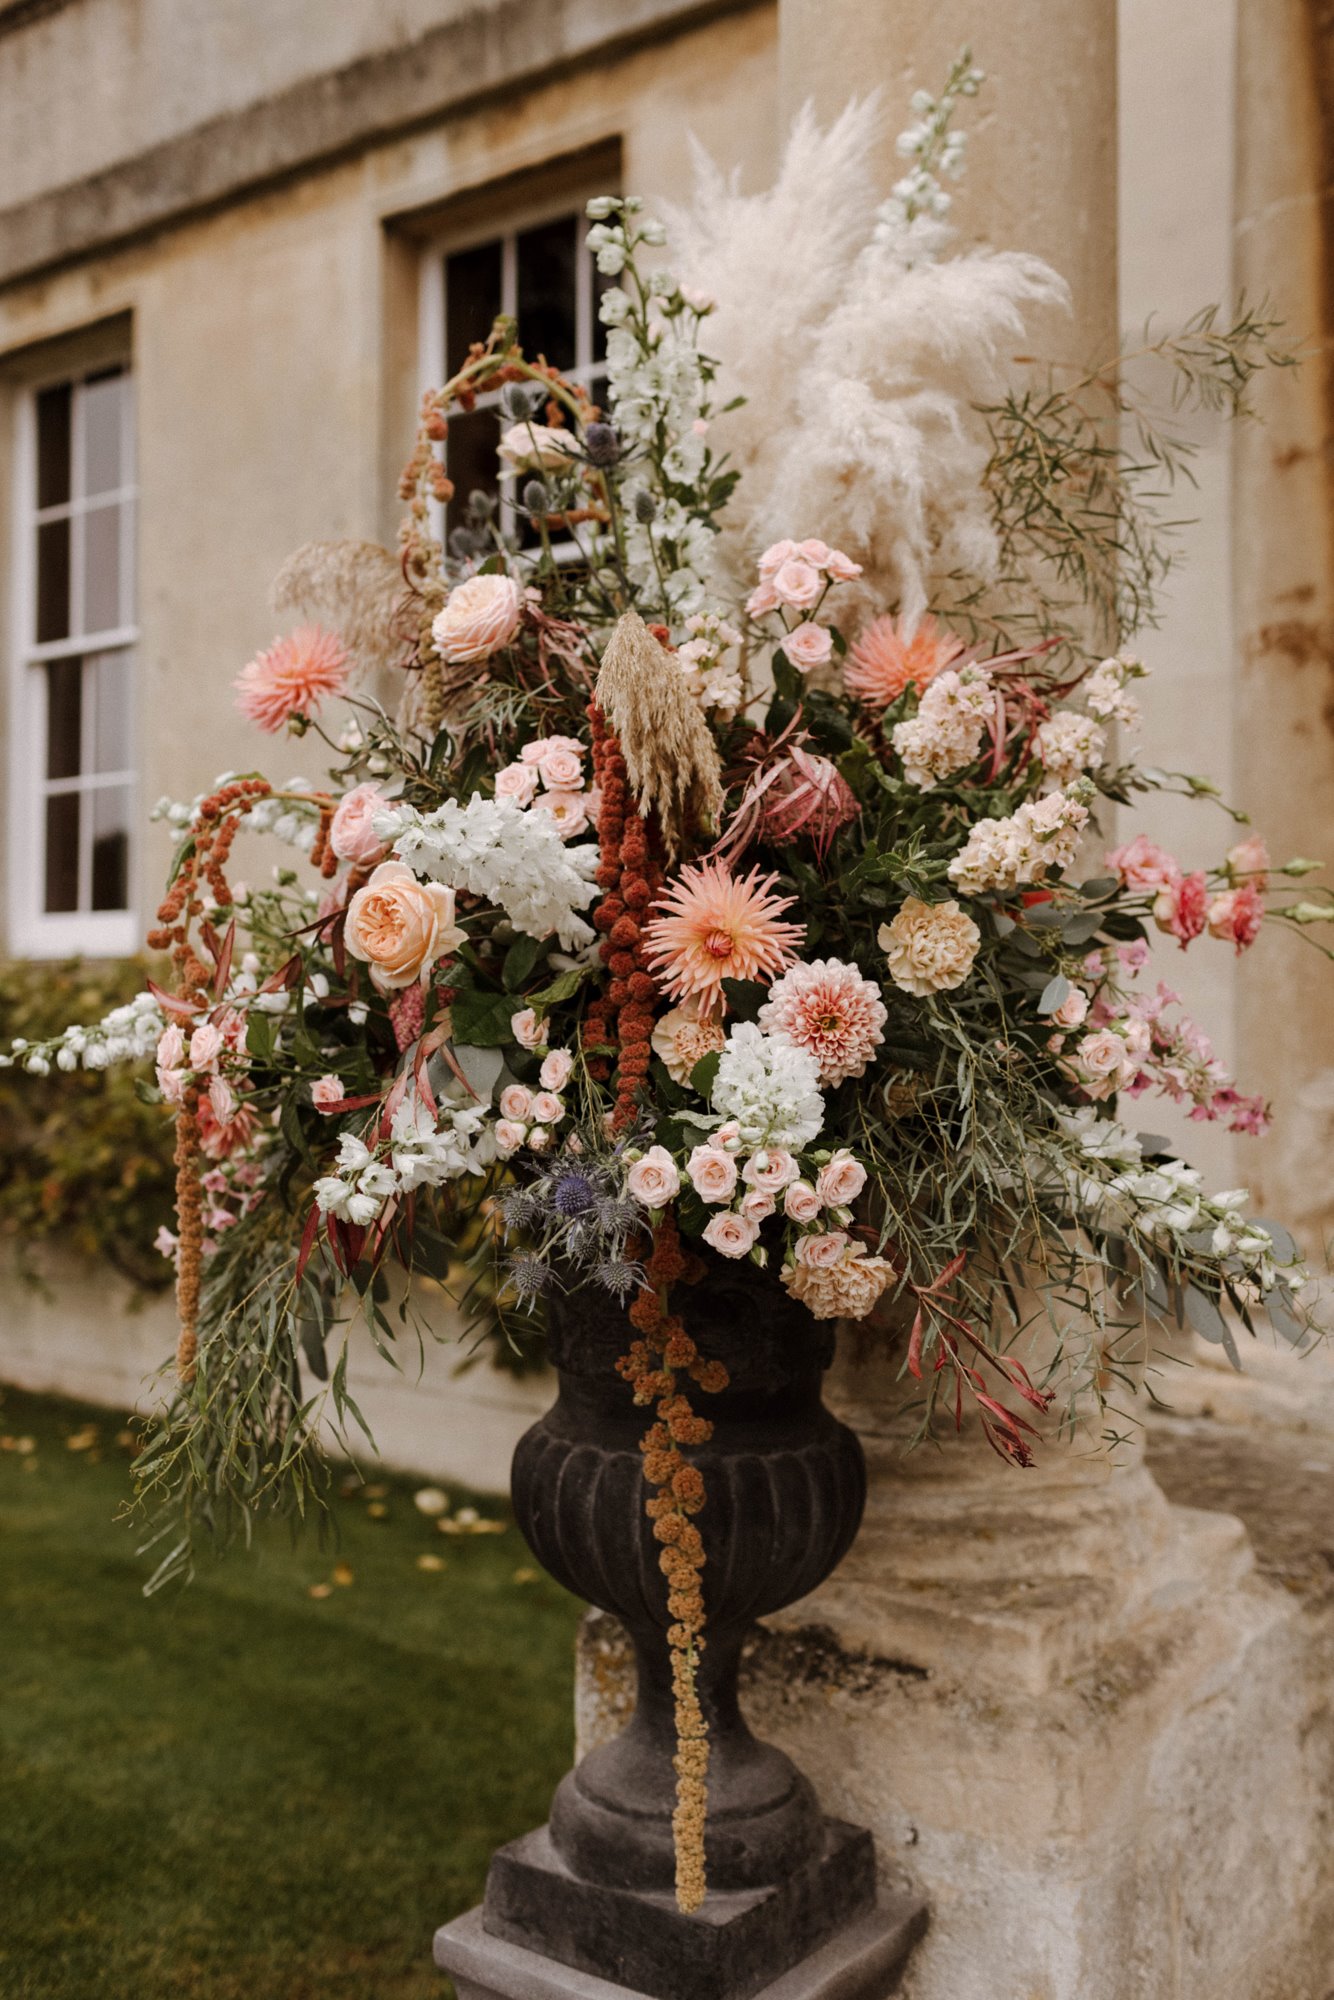 Boho luxe wedding floral displays in urns outside stately home